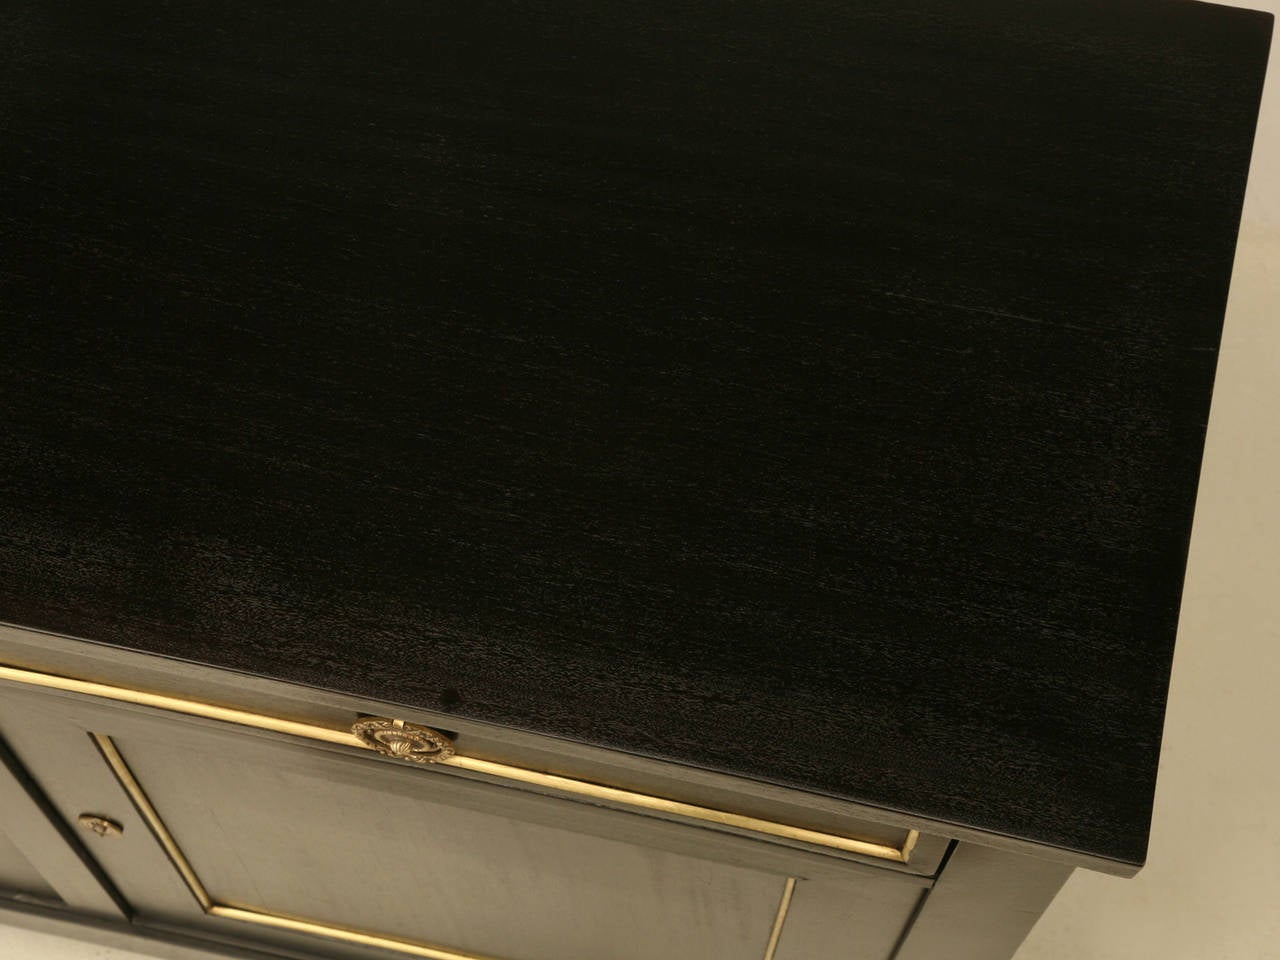 20th Century French Louis XVI Style Buffet Done in a Traditional Ebonized Finish